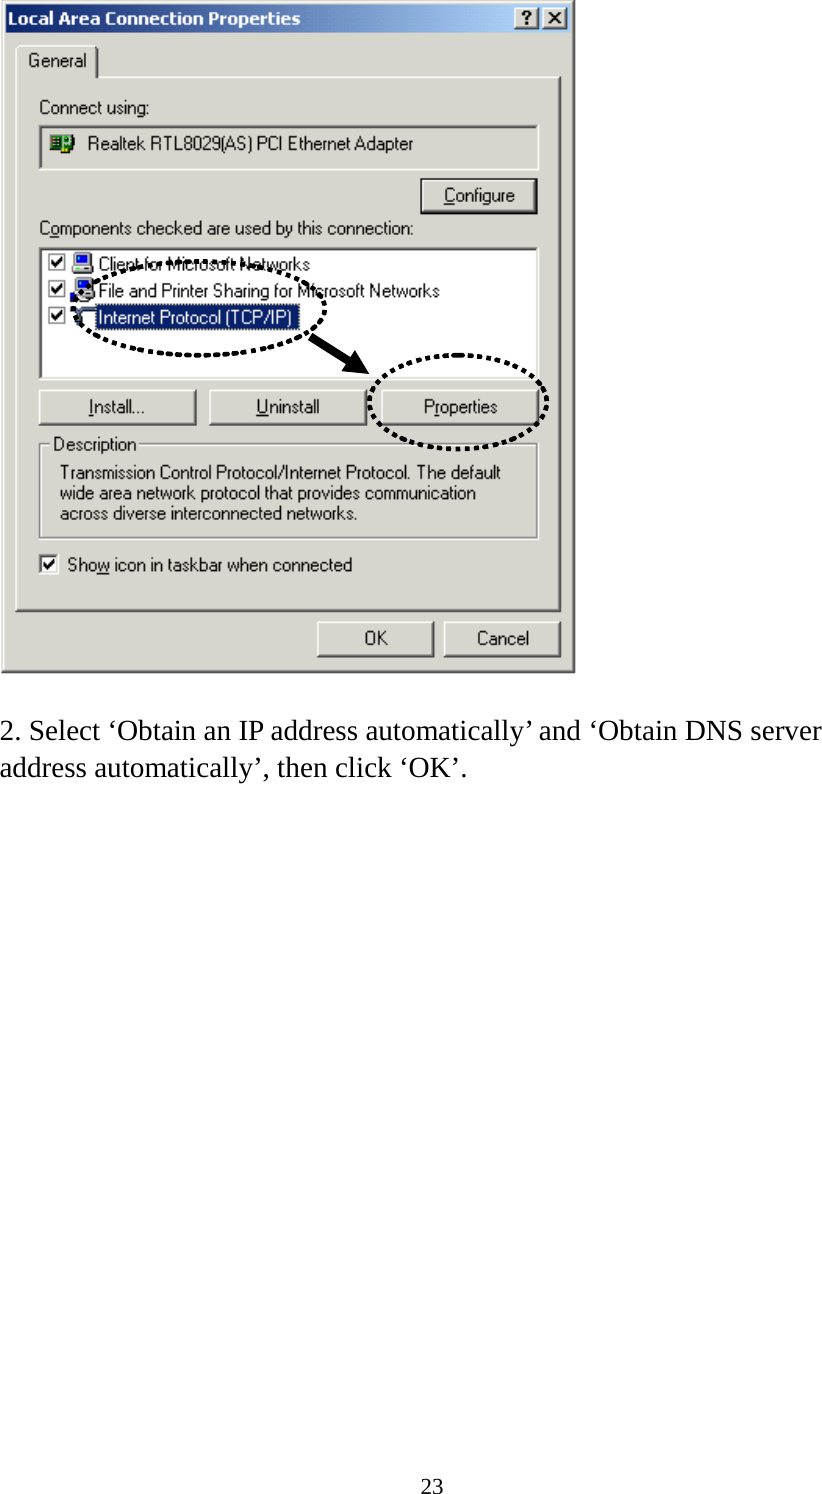 23   2. Select ‘Obtain an IP address automatically’ and ‘Obtain DNS server address automatically’, then click ‘OK’.  